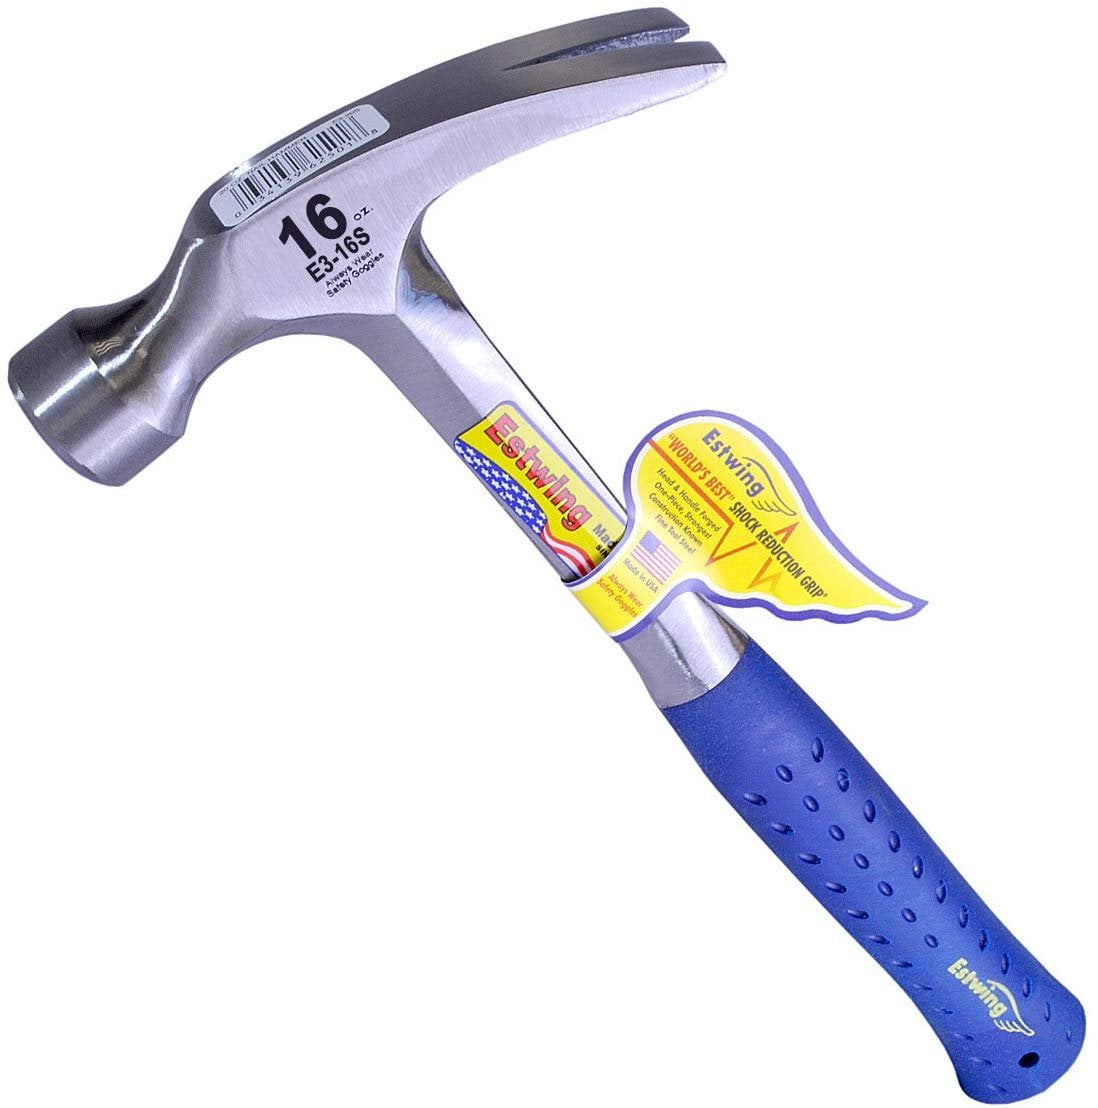 Estwing 16 Oz. Smooth-Face Rip Claw Hammer with Leather-Covered Steel  Handle - Bliffert Lumber and Hardware